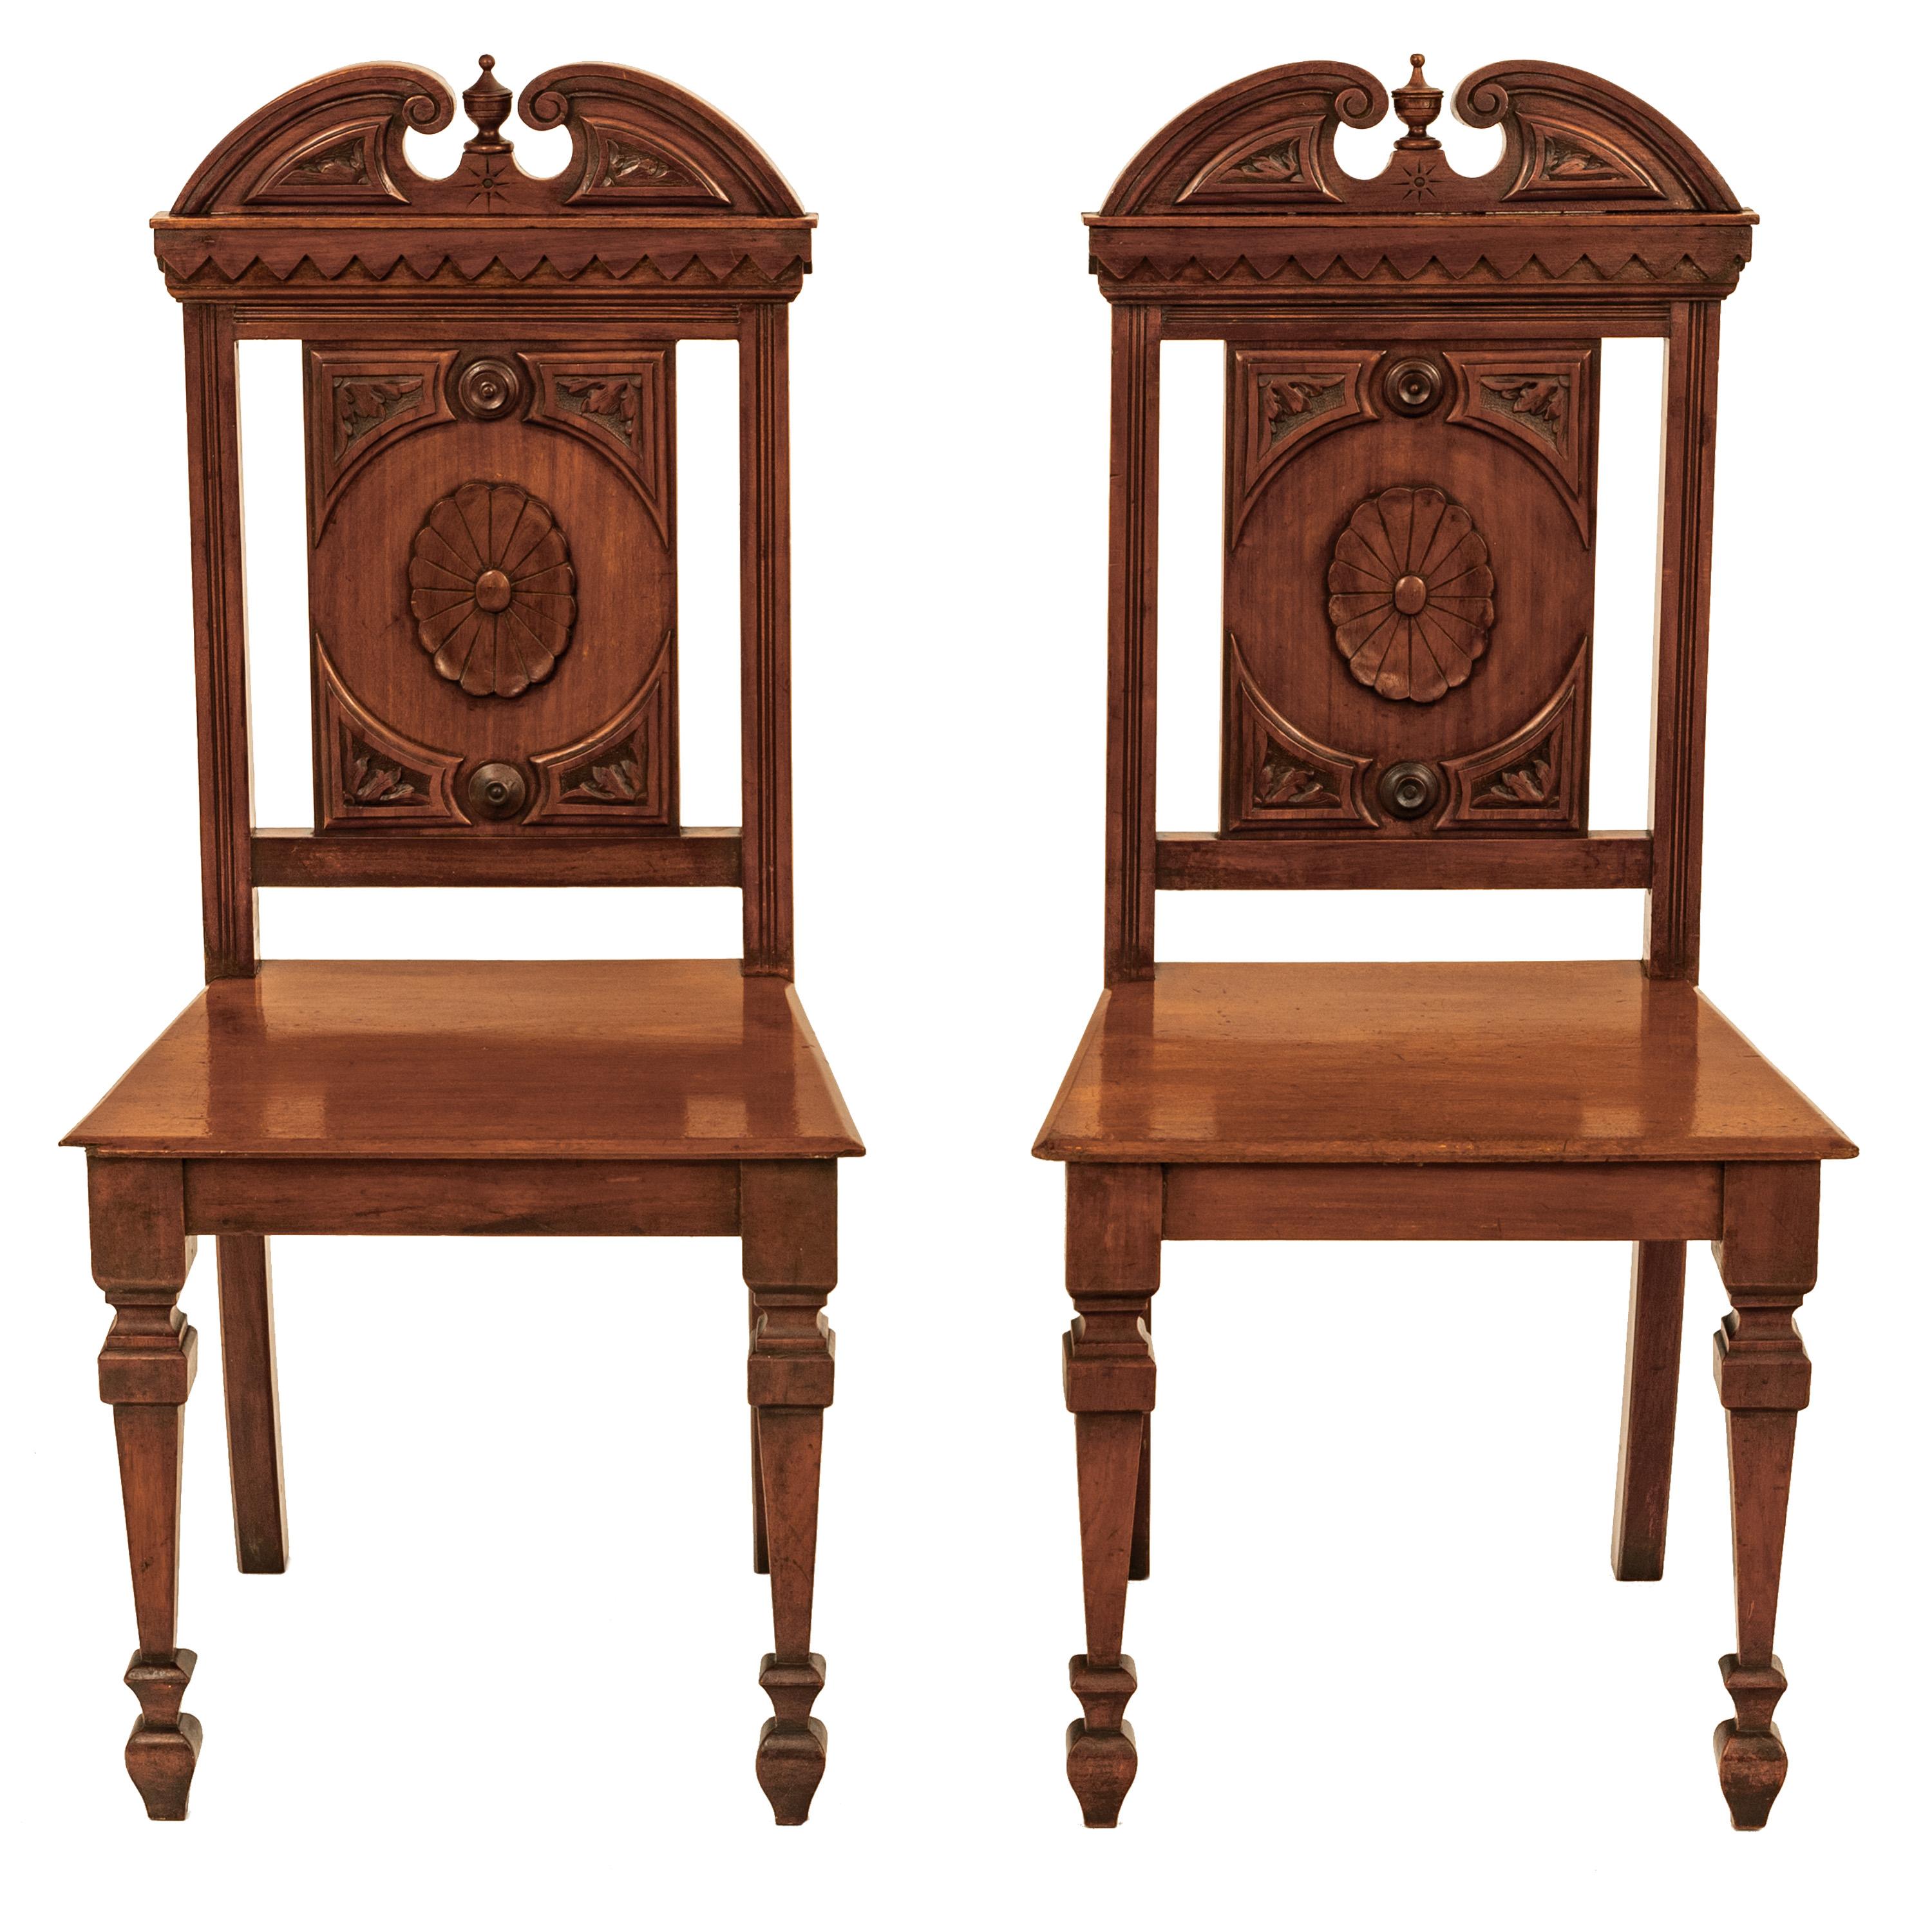 A good pair of antique Regency carved mahogany hall chairs, in the Neo-Classical style, 1830's.
The chairs having an architectural twin 'Swan's Neck' pediment to the top & flanking a turned urn shaped finial, each chair back having central carved